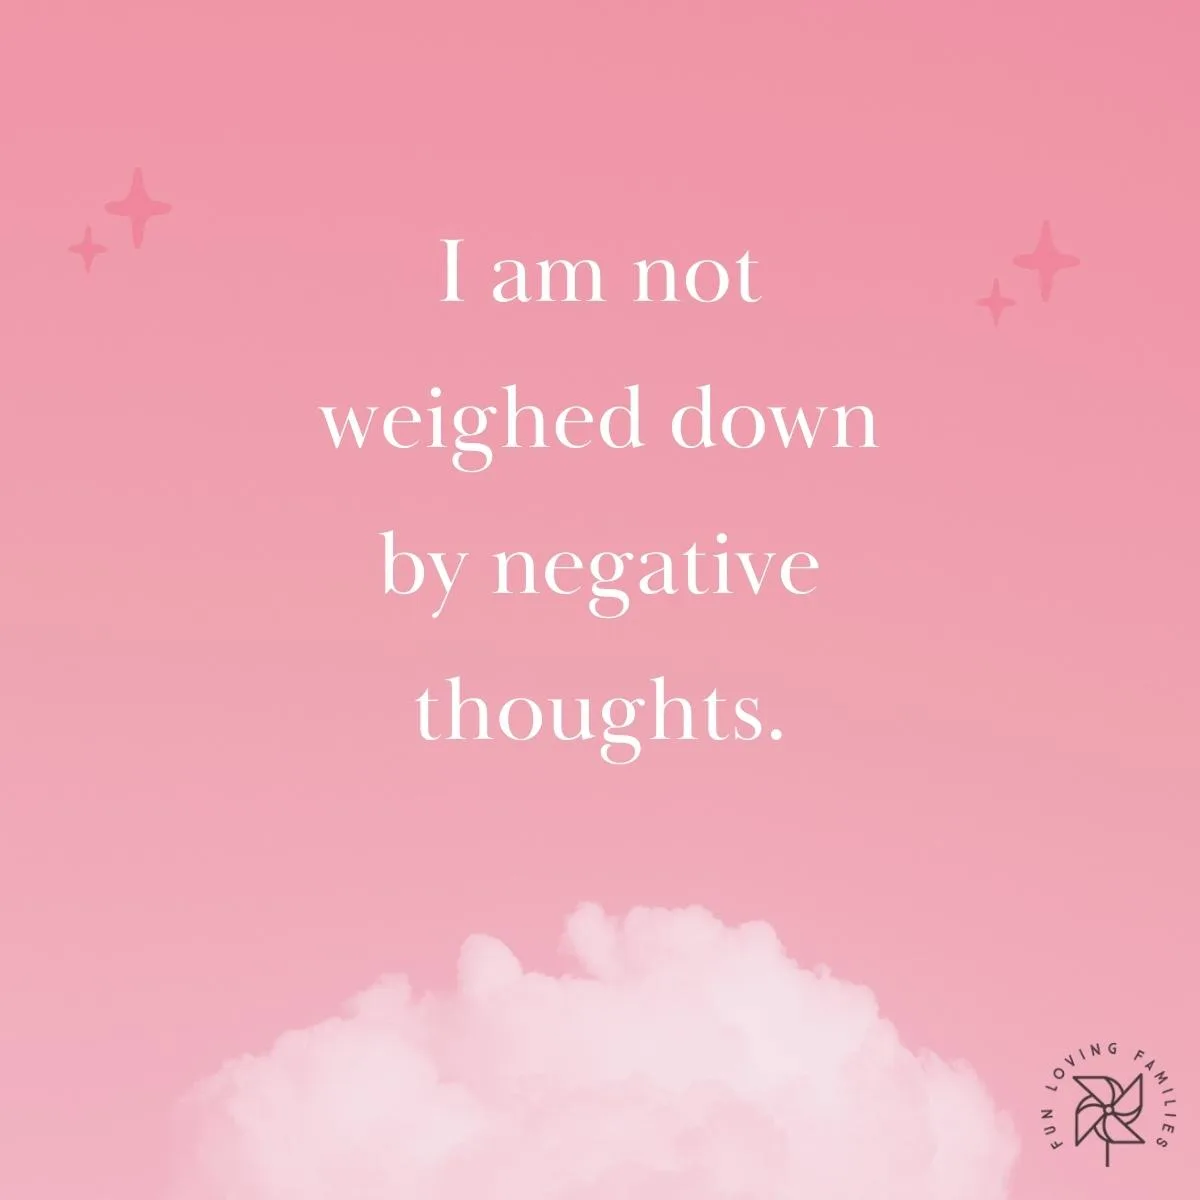 I am not weighed down by negative thoughts affirmation